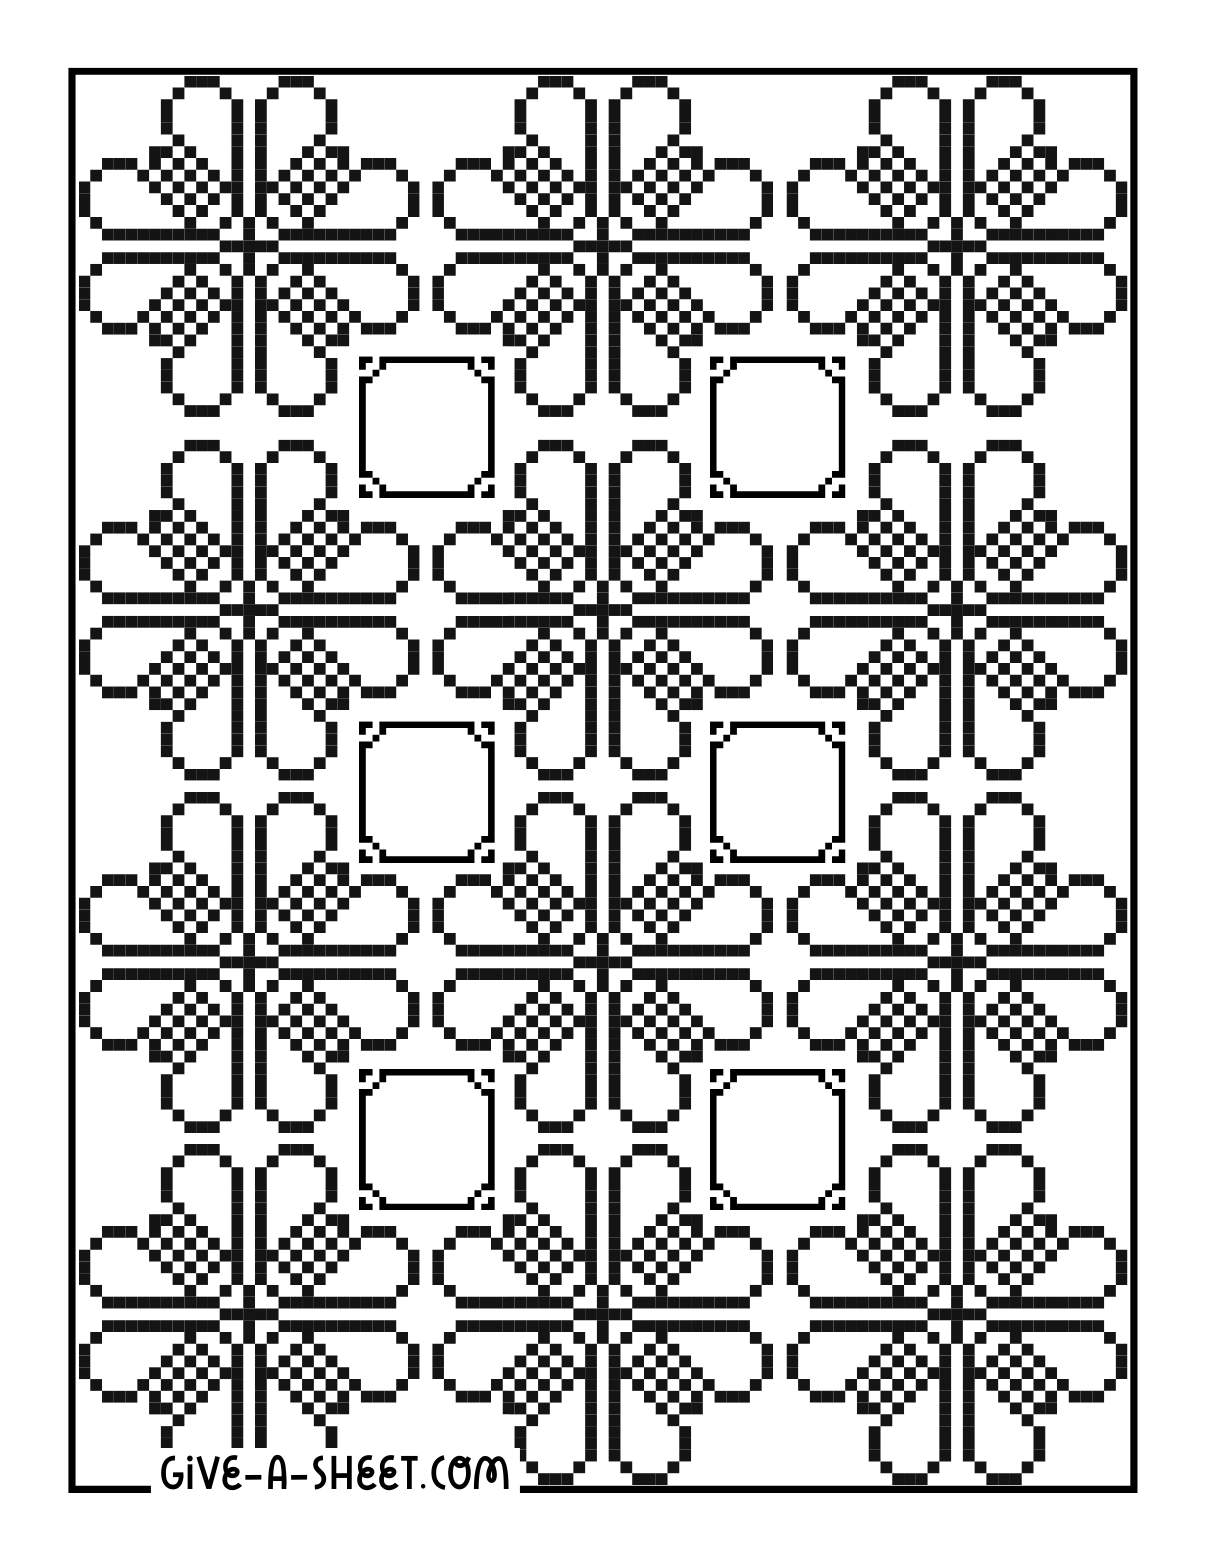 Fair Isle stitch knitting coloring page.